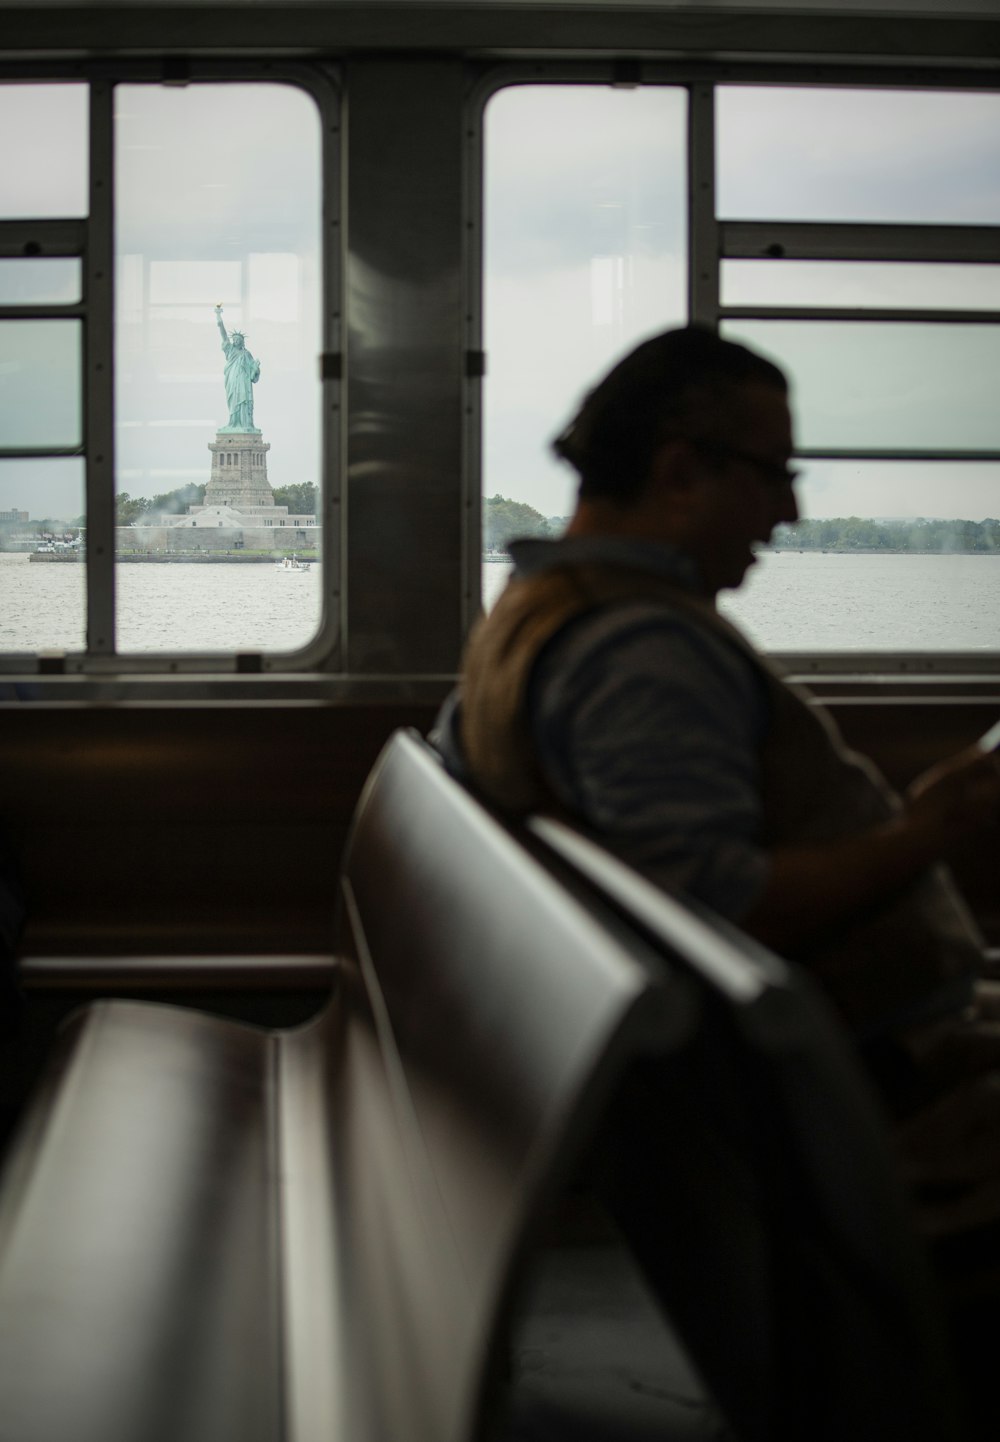 a man sitting on a train next to a statue of liberty